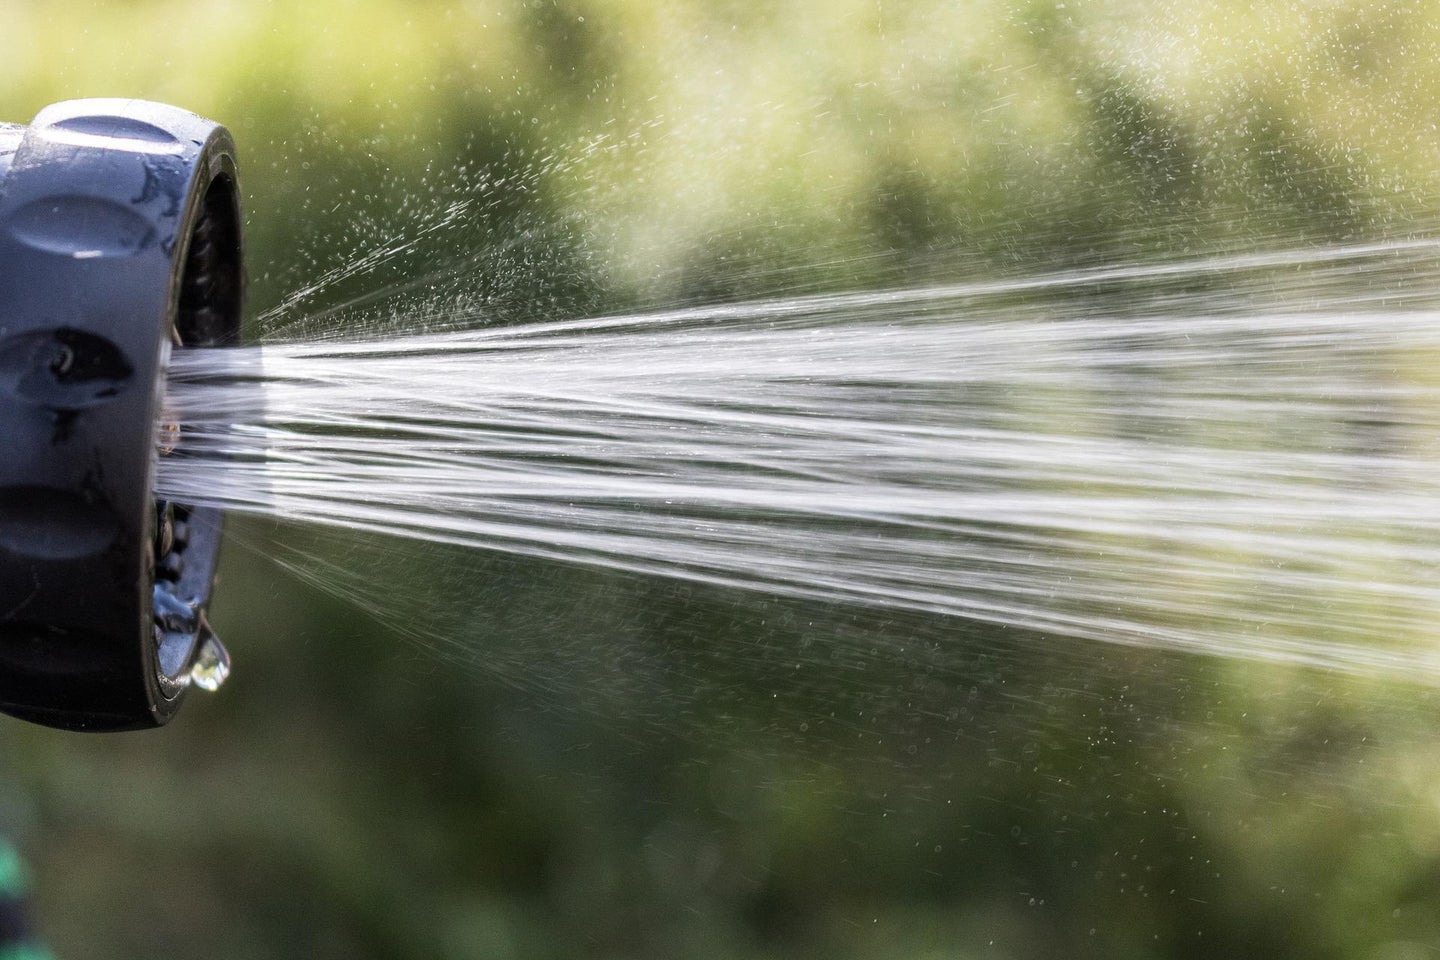 Outdoor watering must be limited in Southern California during a severe drought.